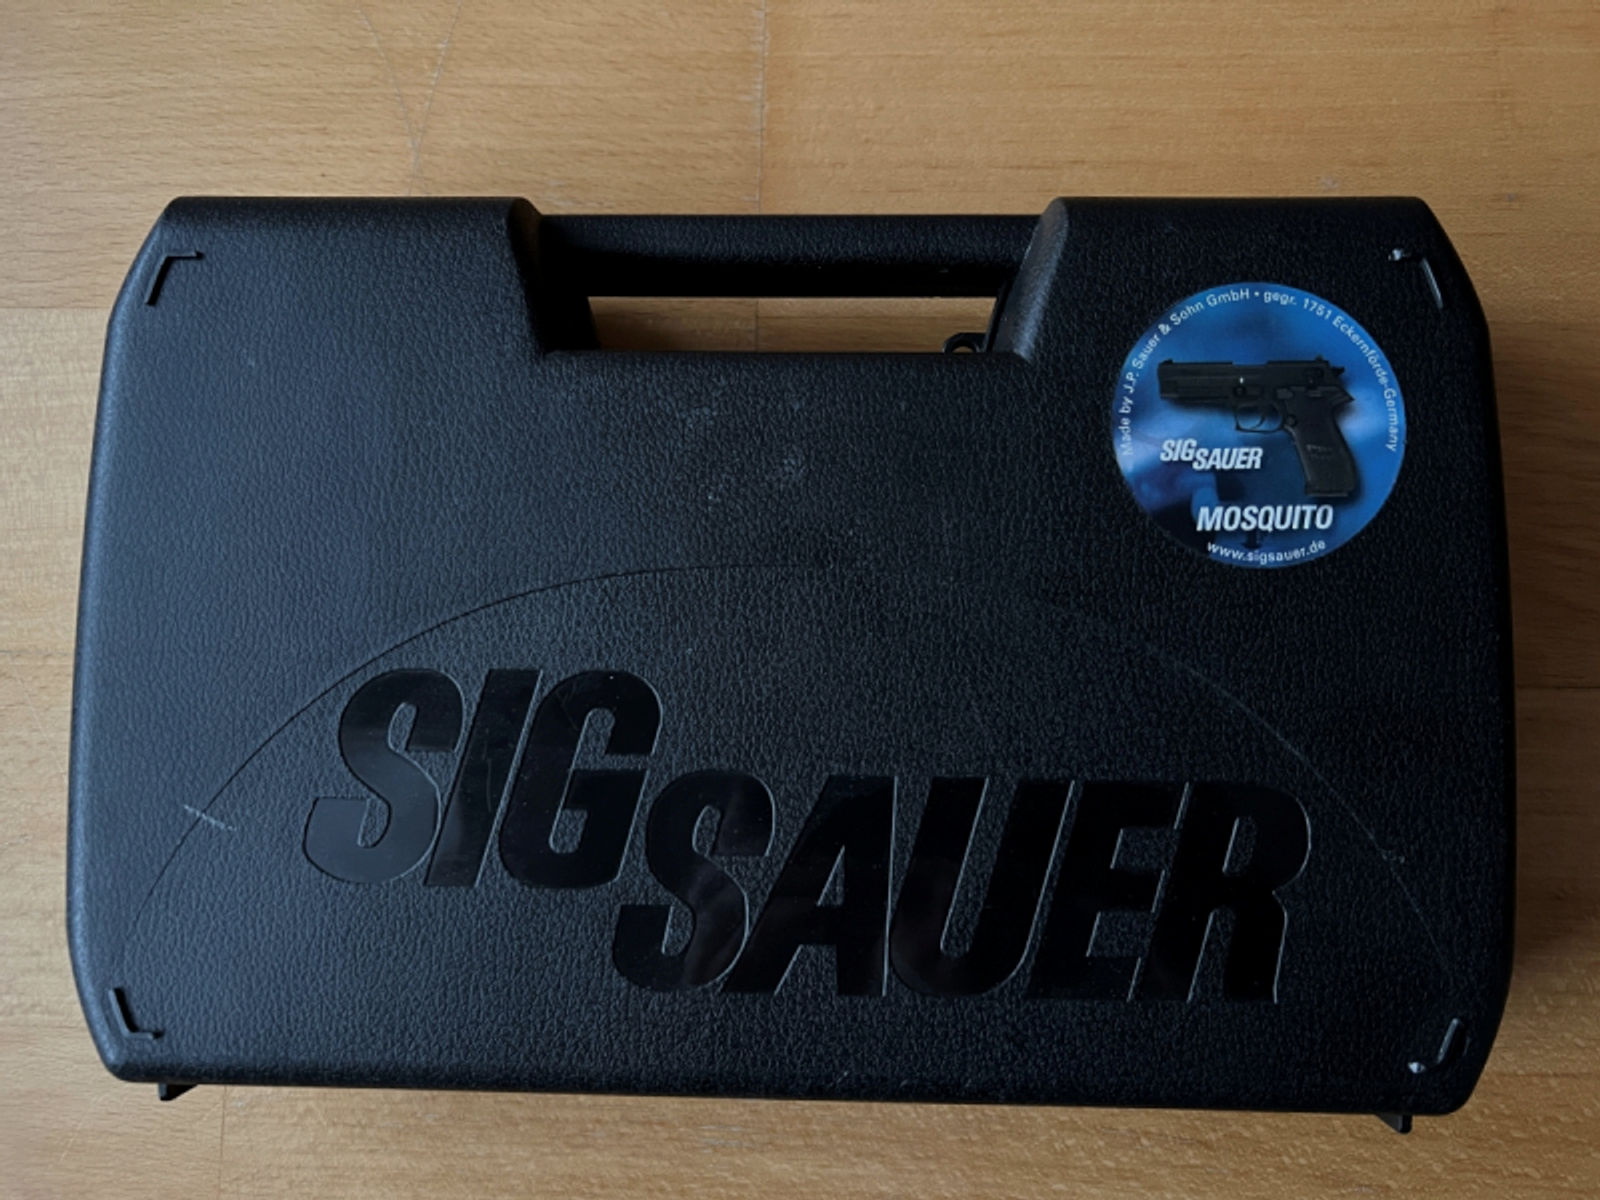 Sig Sauer Mosquito made in Germany im Kaliber .22lfB